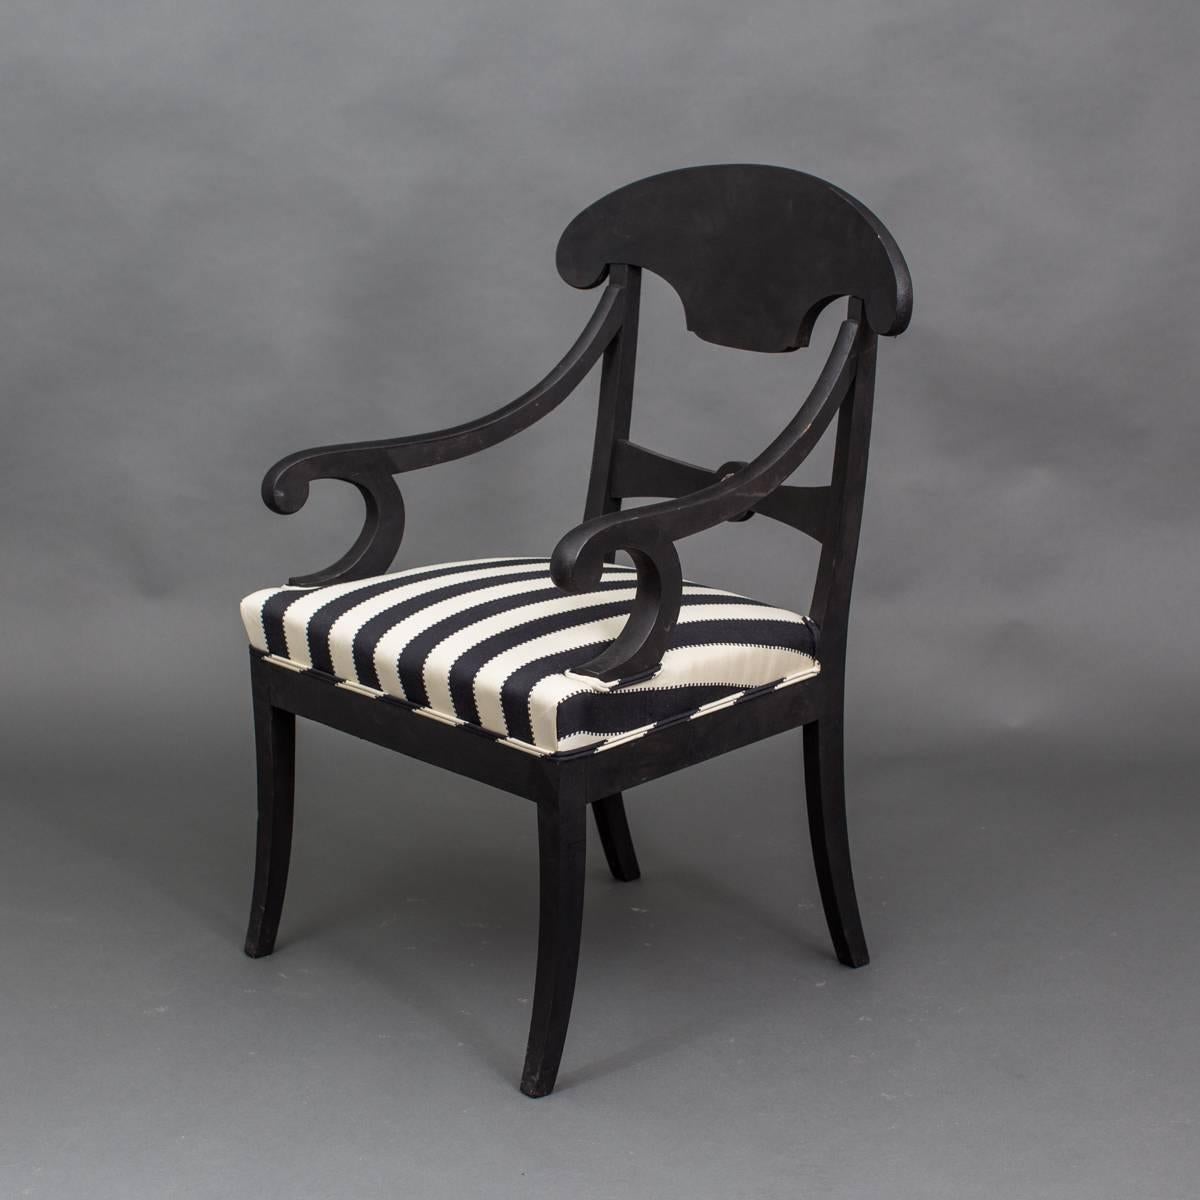 Armchair Swedish Black Neoclassical, 19th Century Sweden For Sale 2